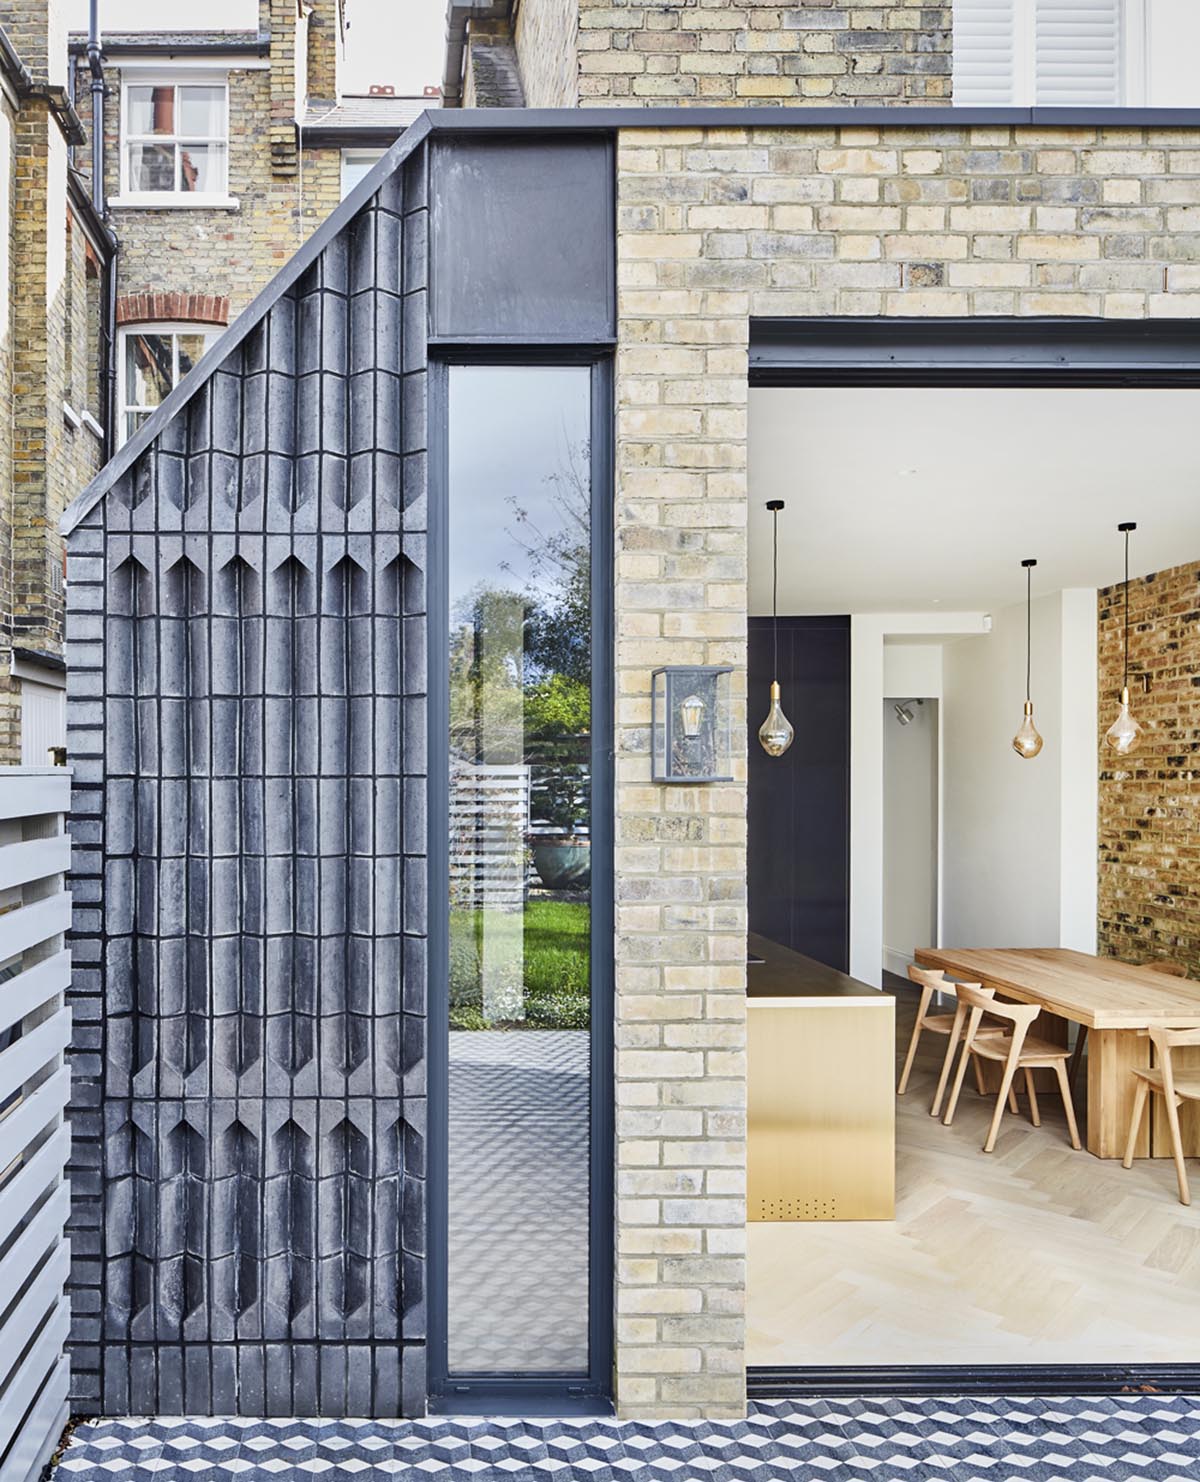 Extension by Mulroy Architects uses special plinth bricks